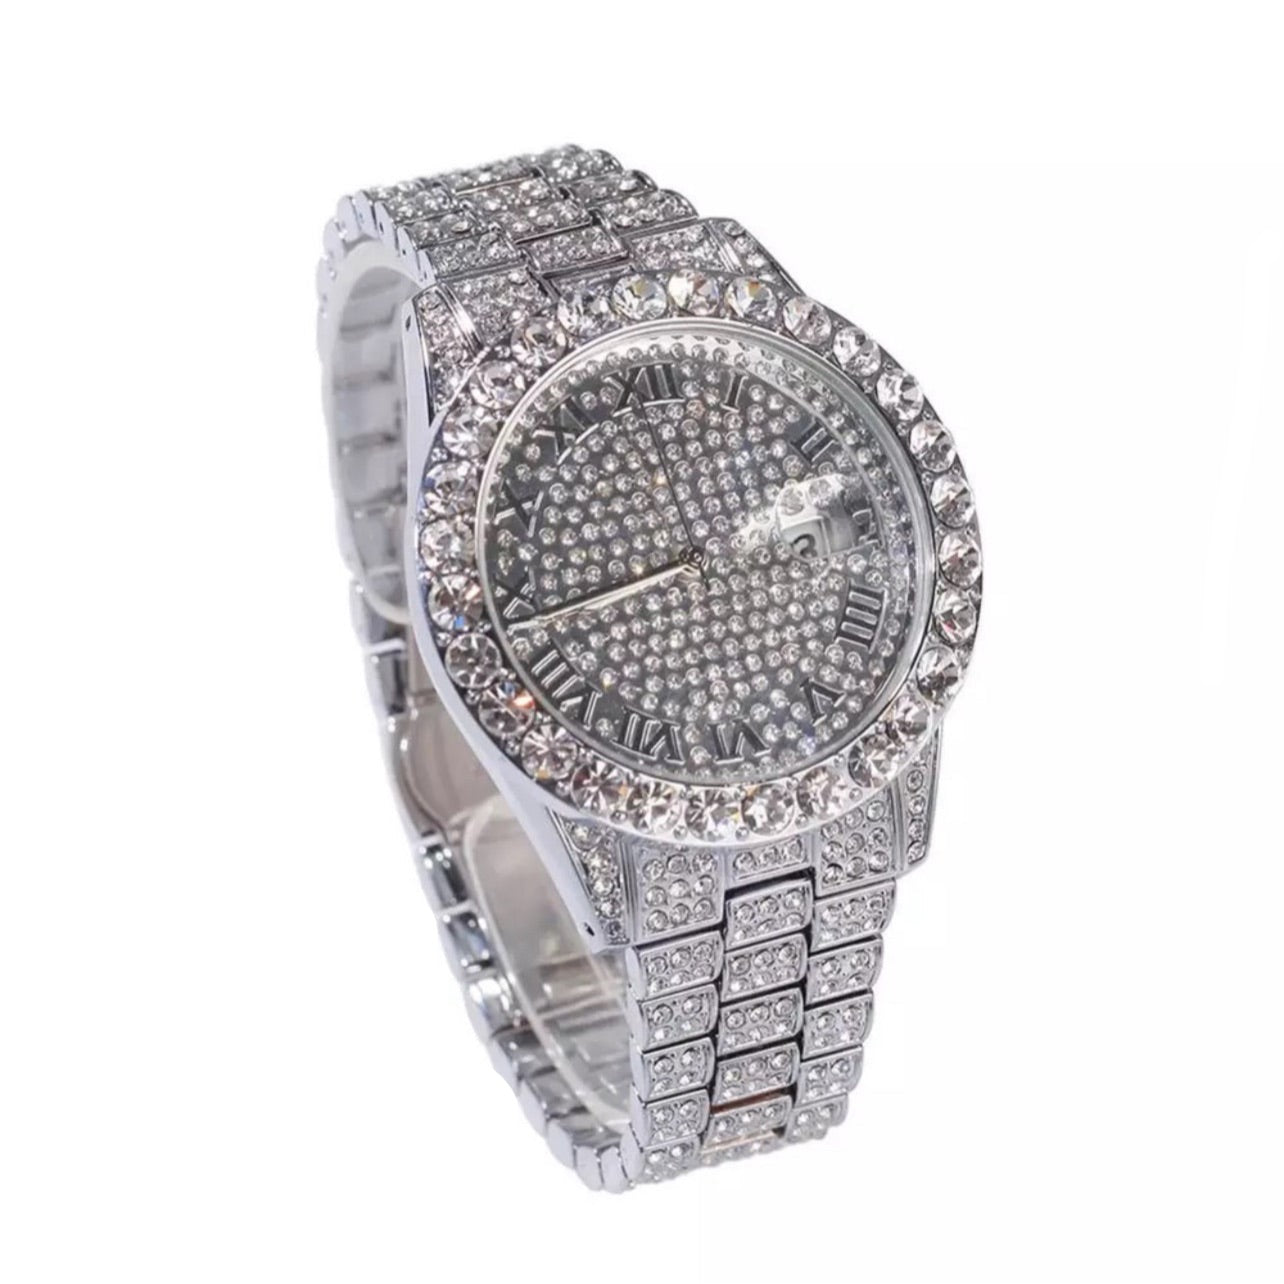 So Icy Watch “Silver”